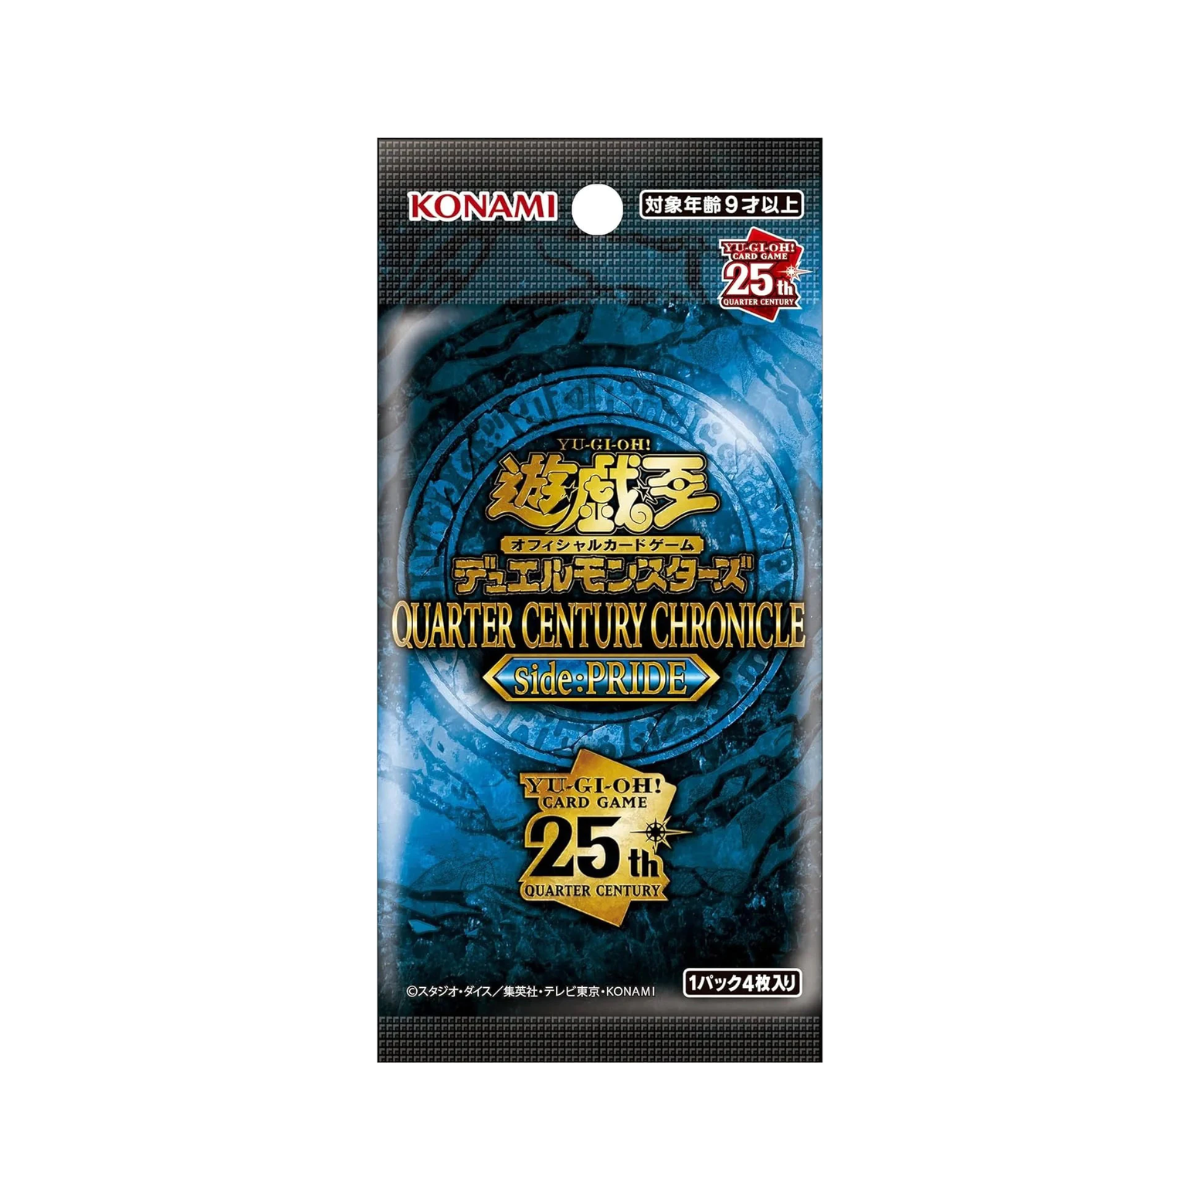 Yu-Gi-Oh OCG Quarter Century Chronicle Side Booster Packs (Japanese)-Pride-Konami-Ace Cards &amp; Collectibles